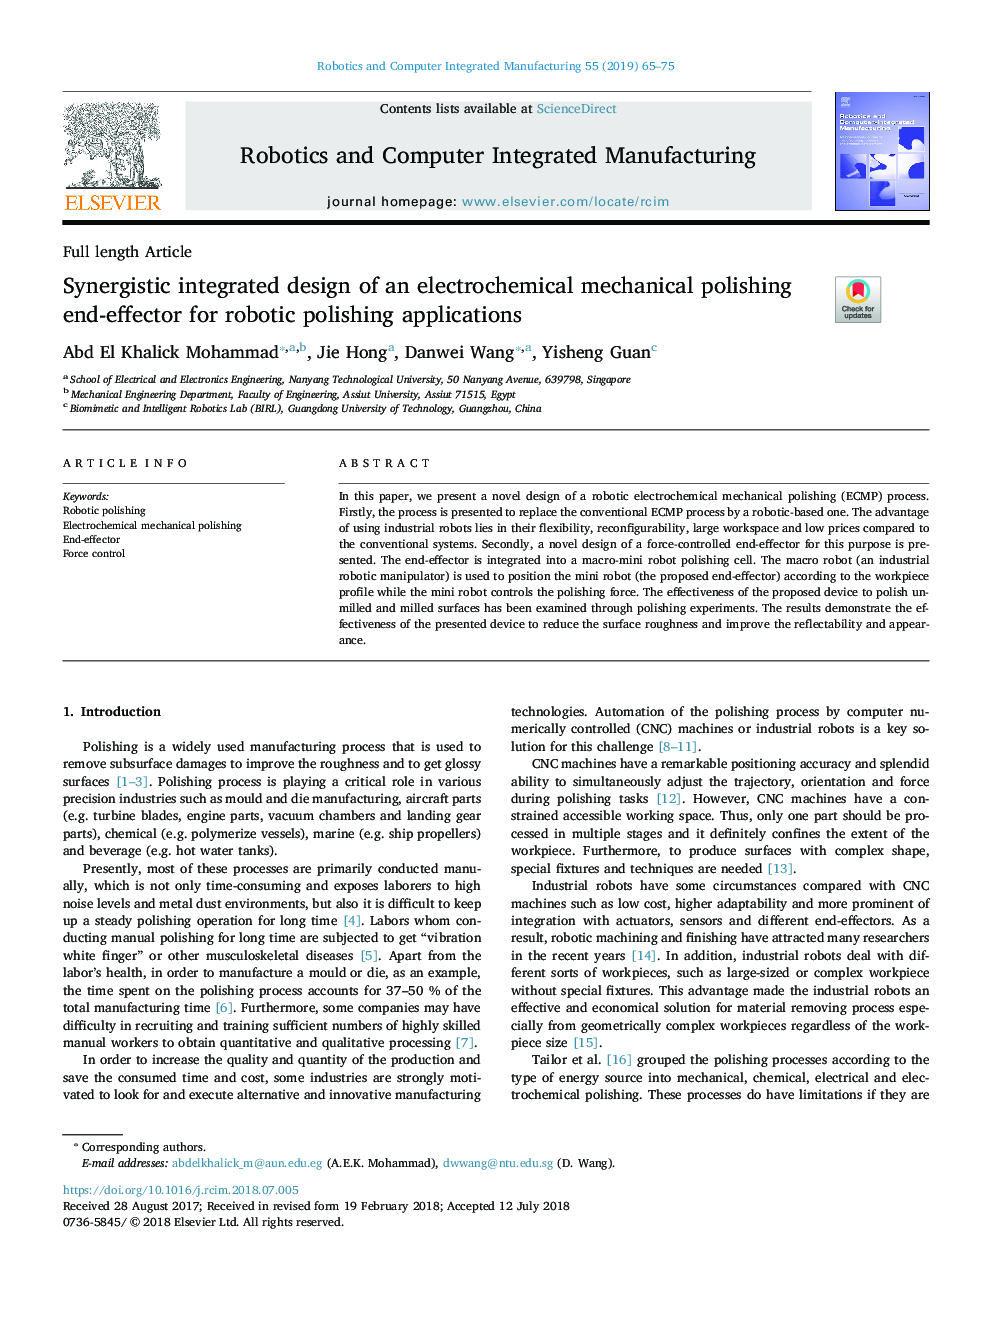 Synergistic integrated design of an electrochemical mechanical polishing end-effector for robotic polishing applications